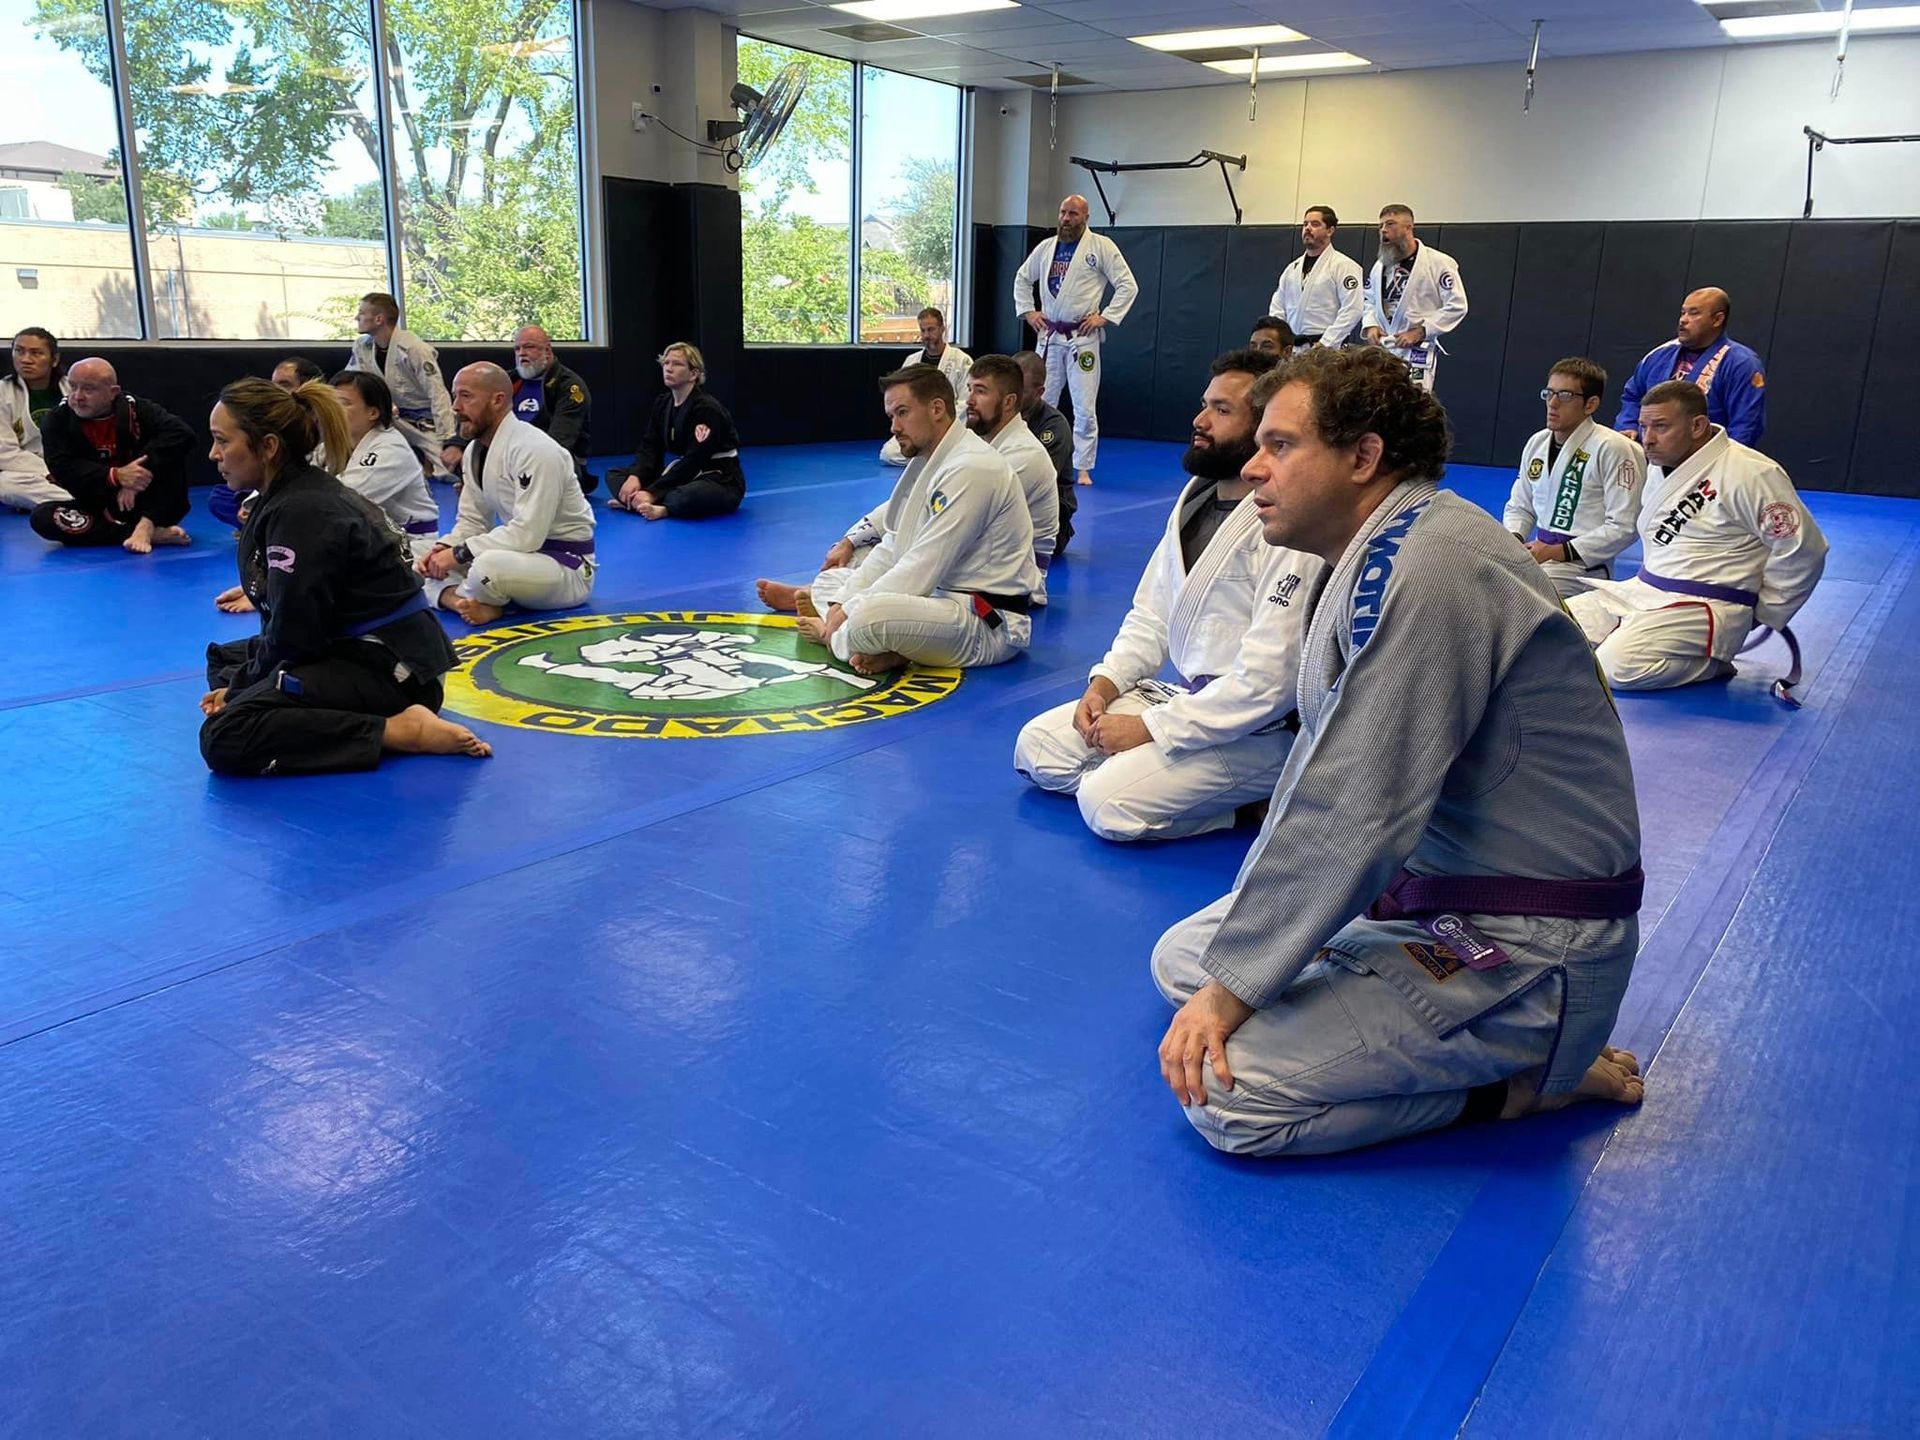 a group of people are sitting on a blue mat in a gym .